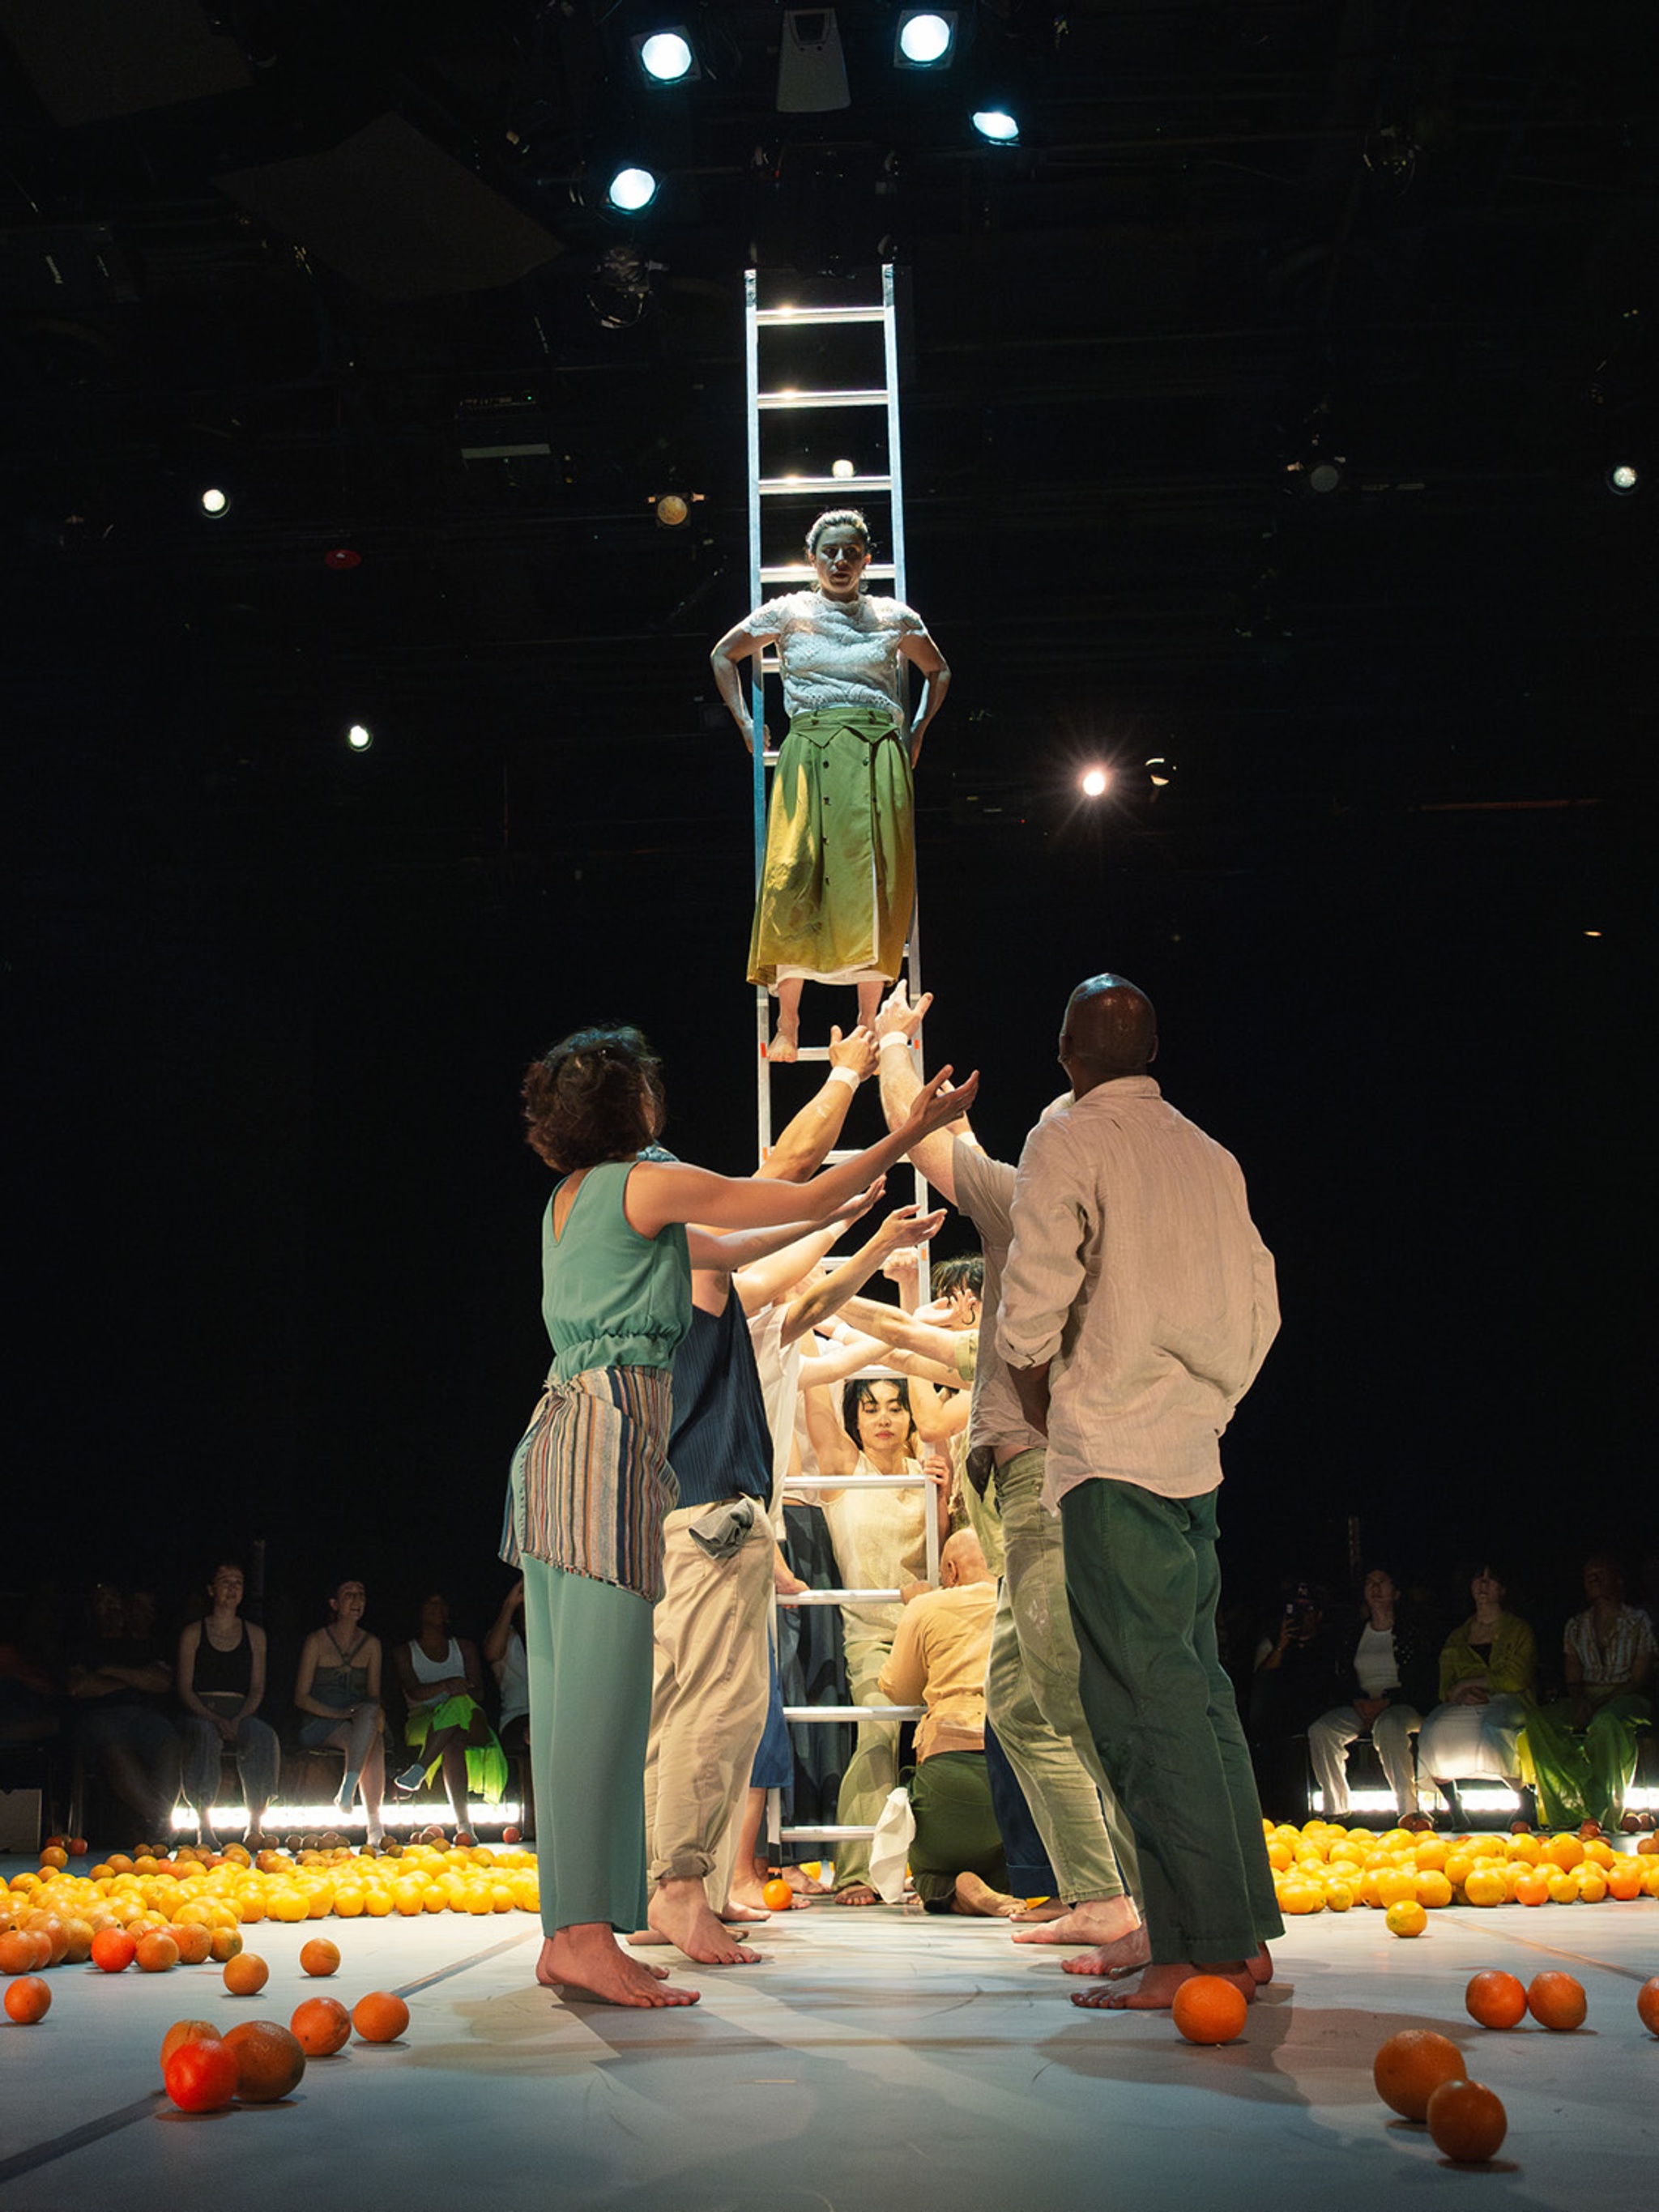 A group of dancers holds a metal ladder erect in the center of a circular performance stage. One dancer has climbed the ladder above the others' heads. Around them are strewn brightly colored oranges. 